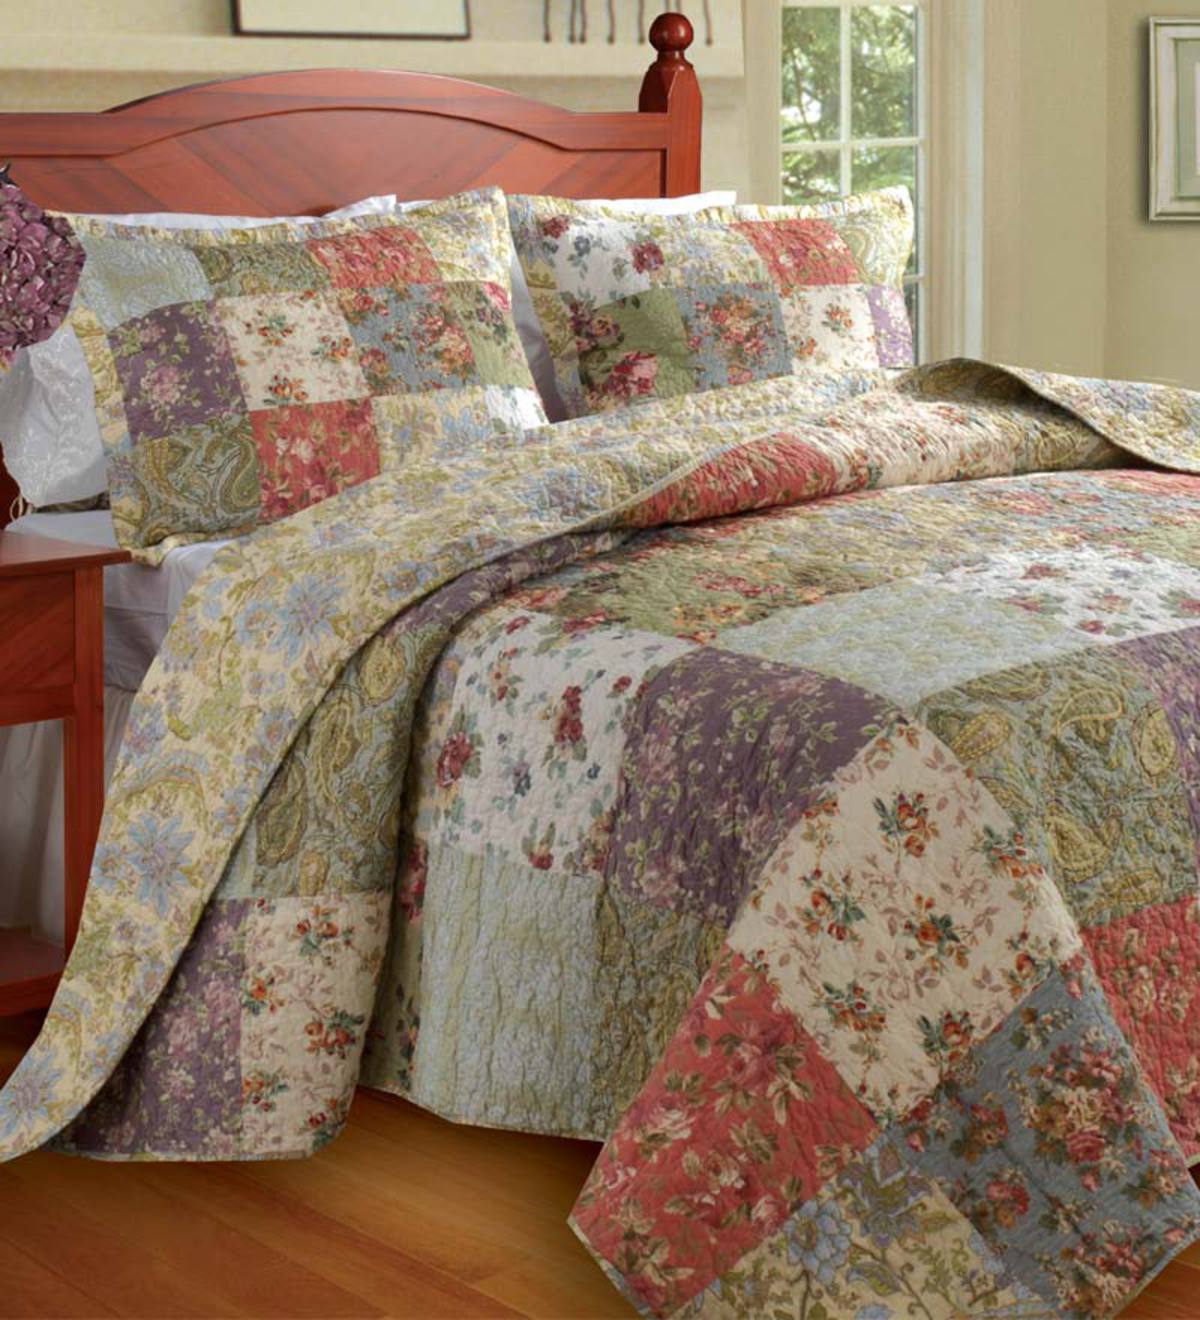 Full 100% Cotton Wildflower Patchwork Block Reversible Bedspread And Shams